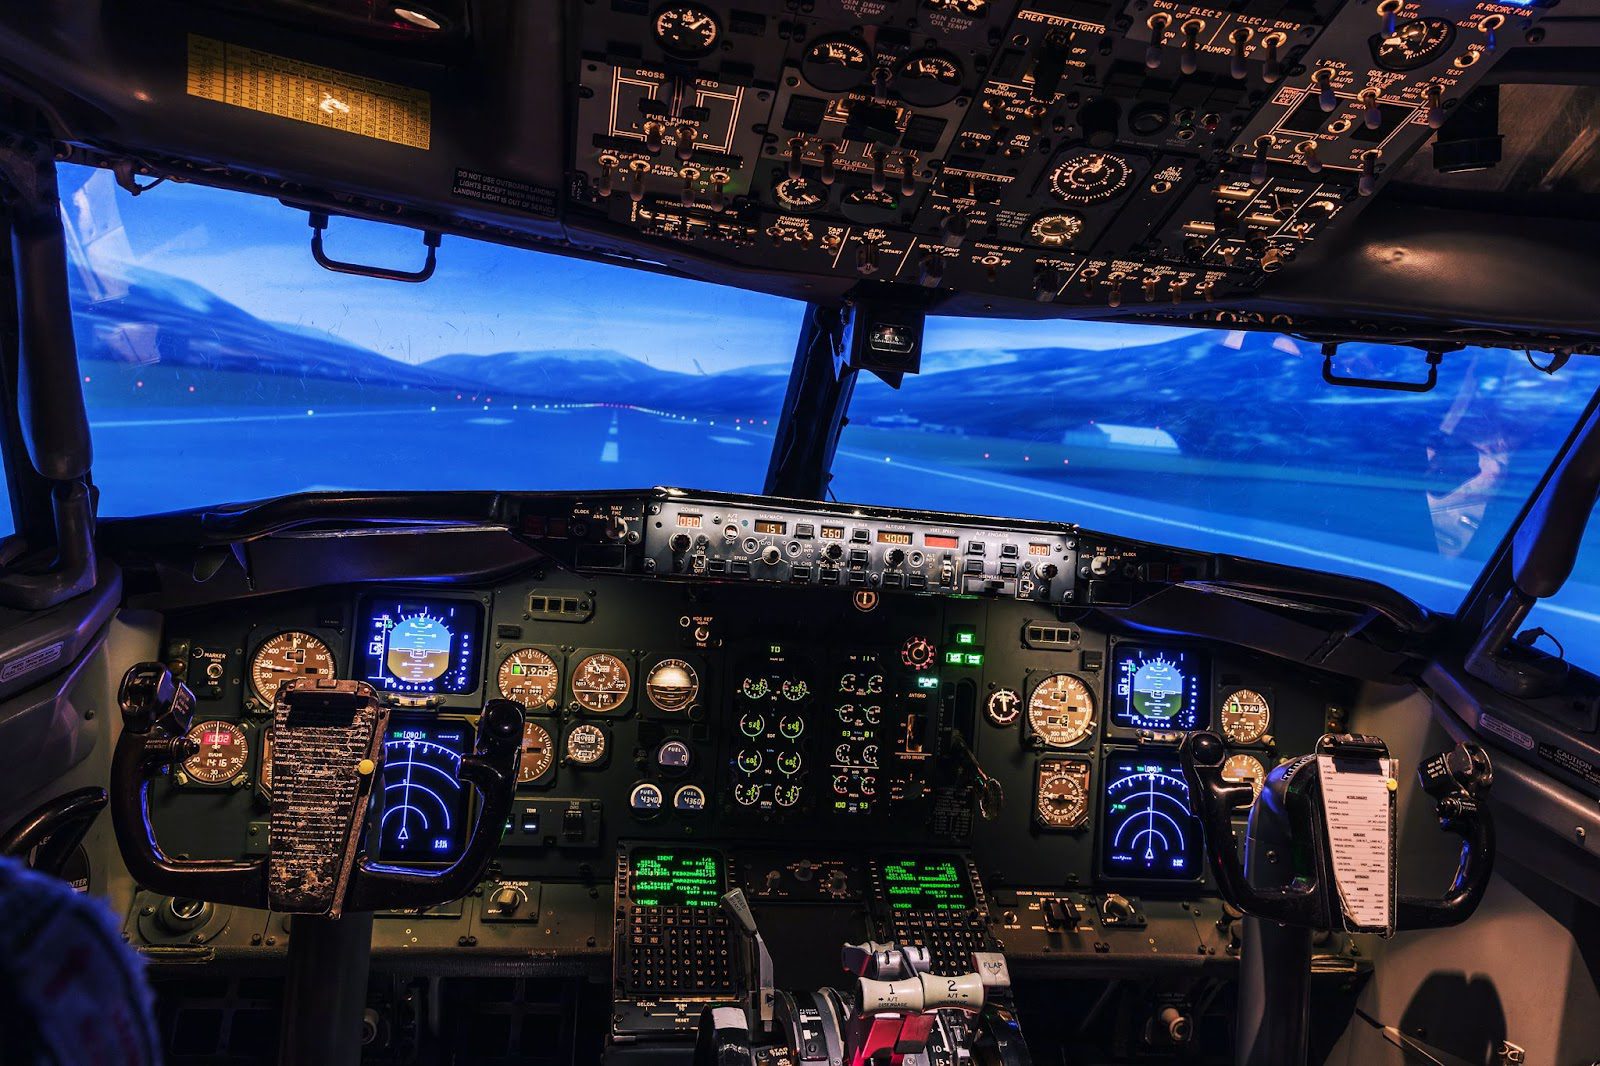 Sensors and instrumentation are essential to safe and successful aerospace operations.